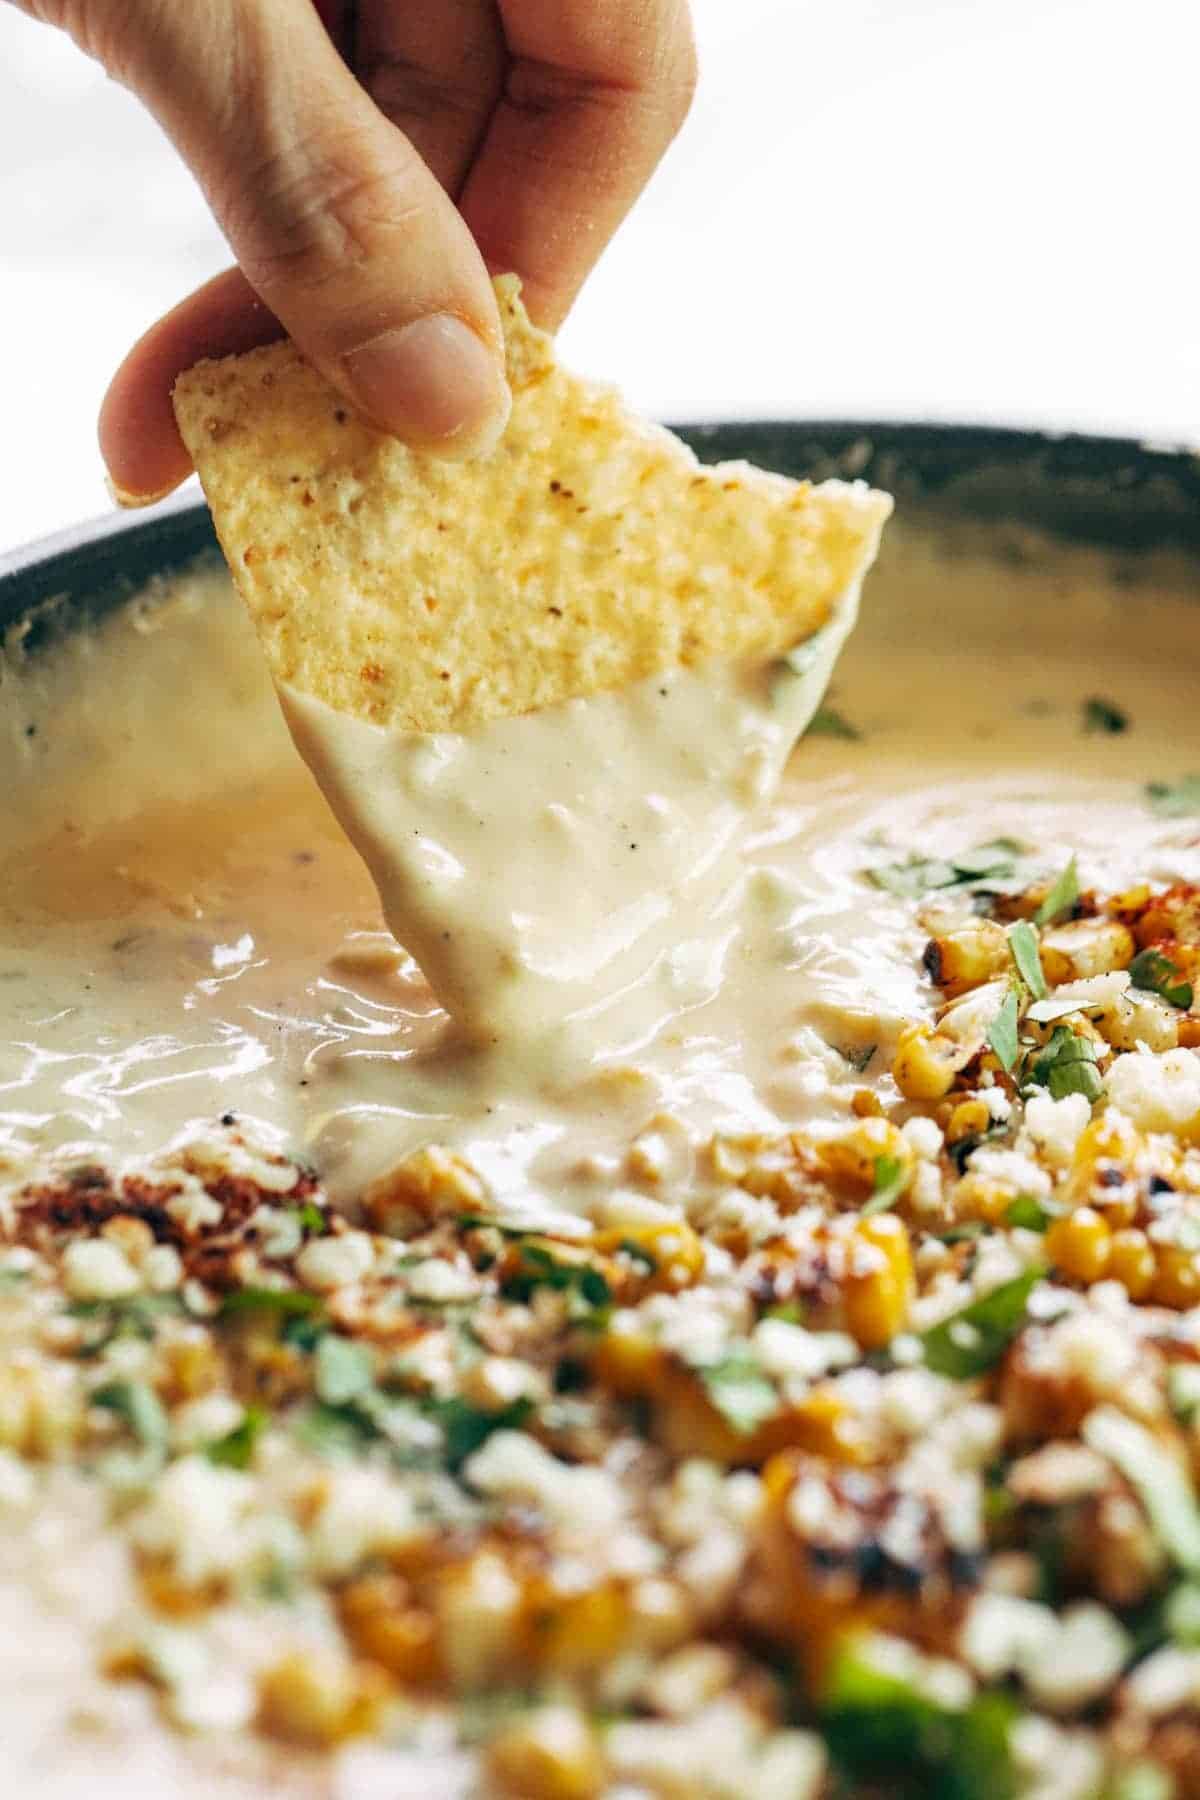 Chip dipping into elote queso.